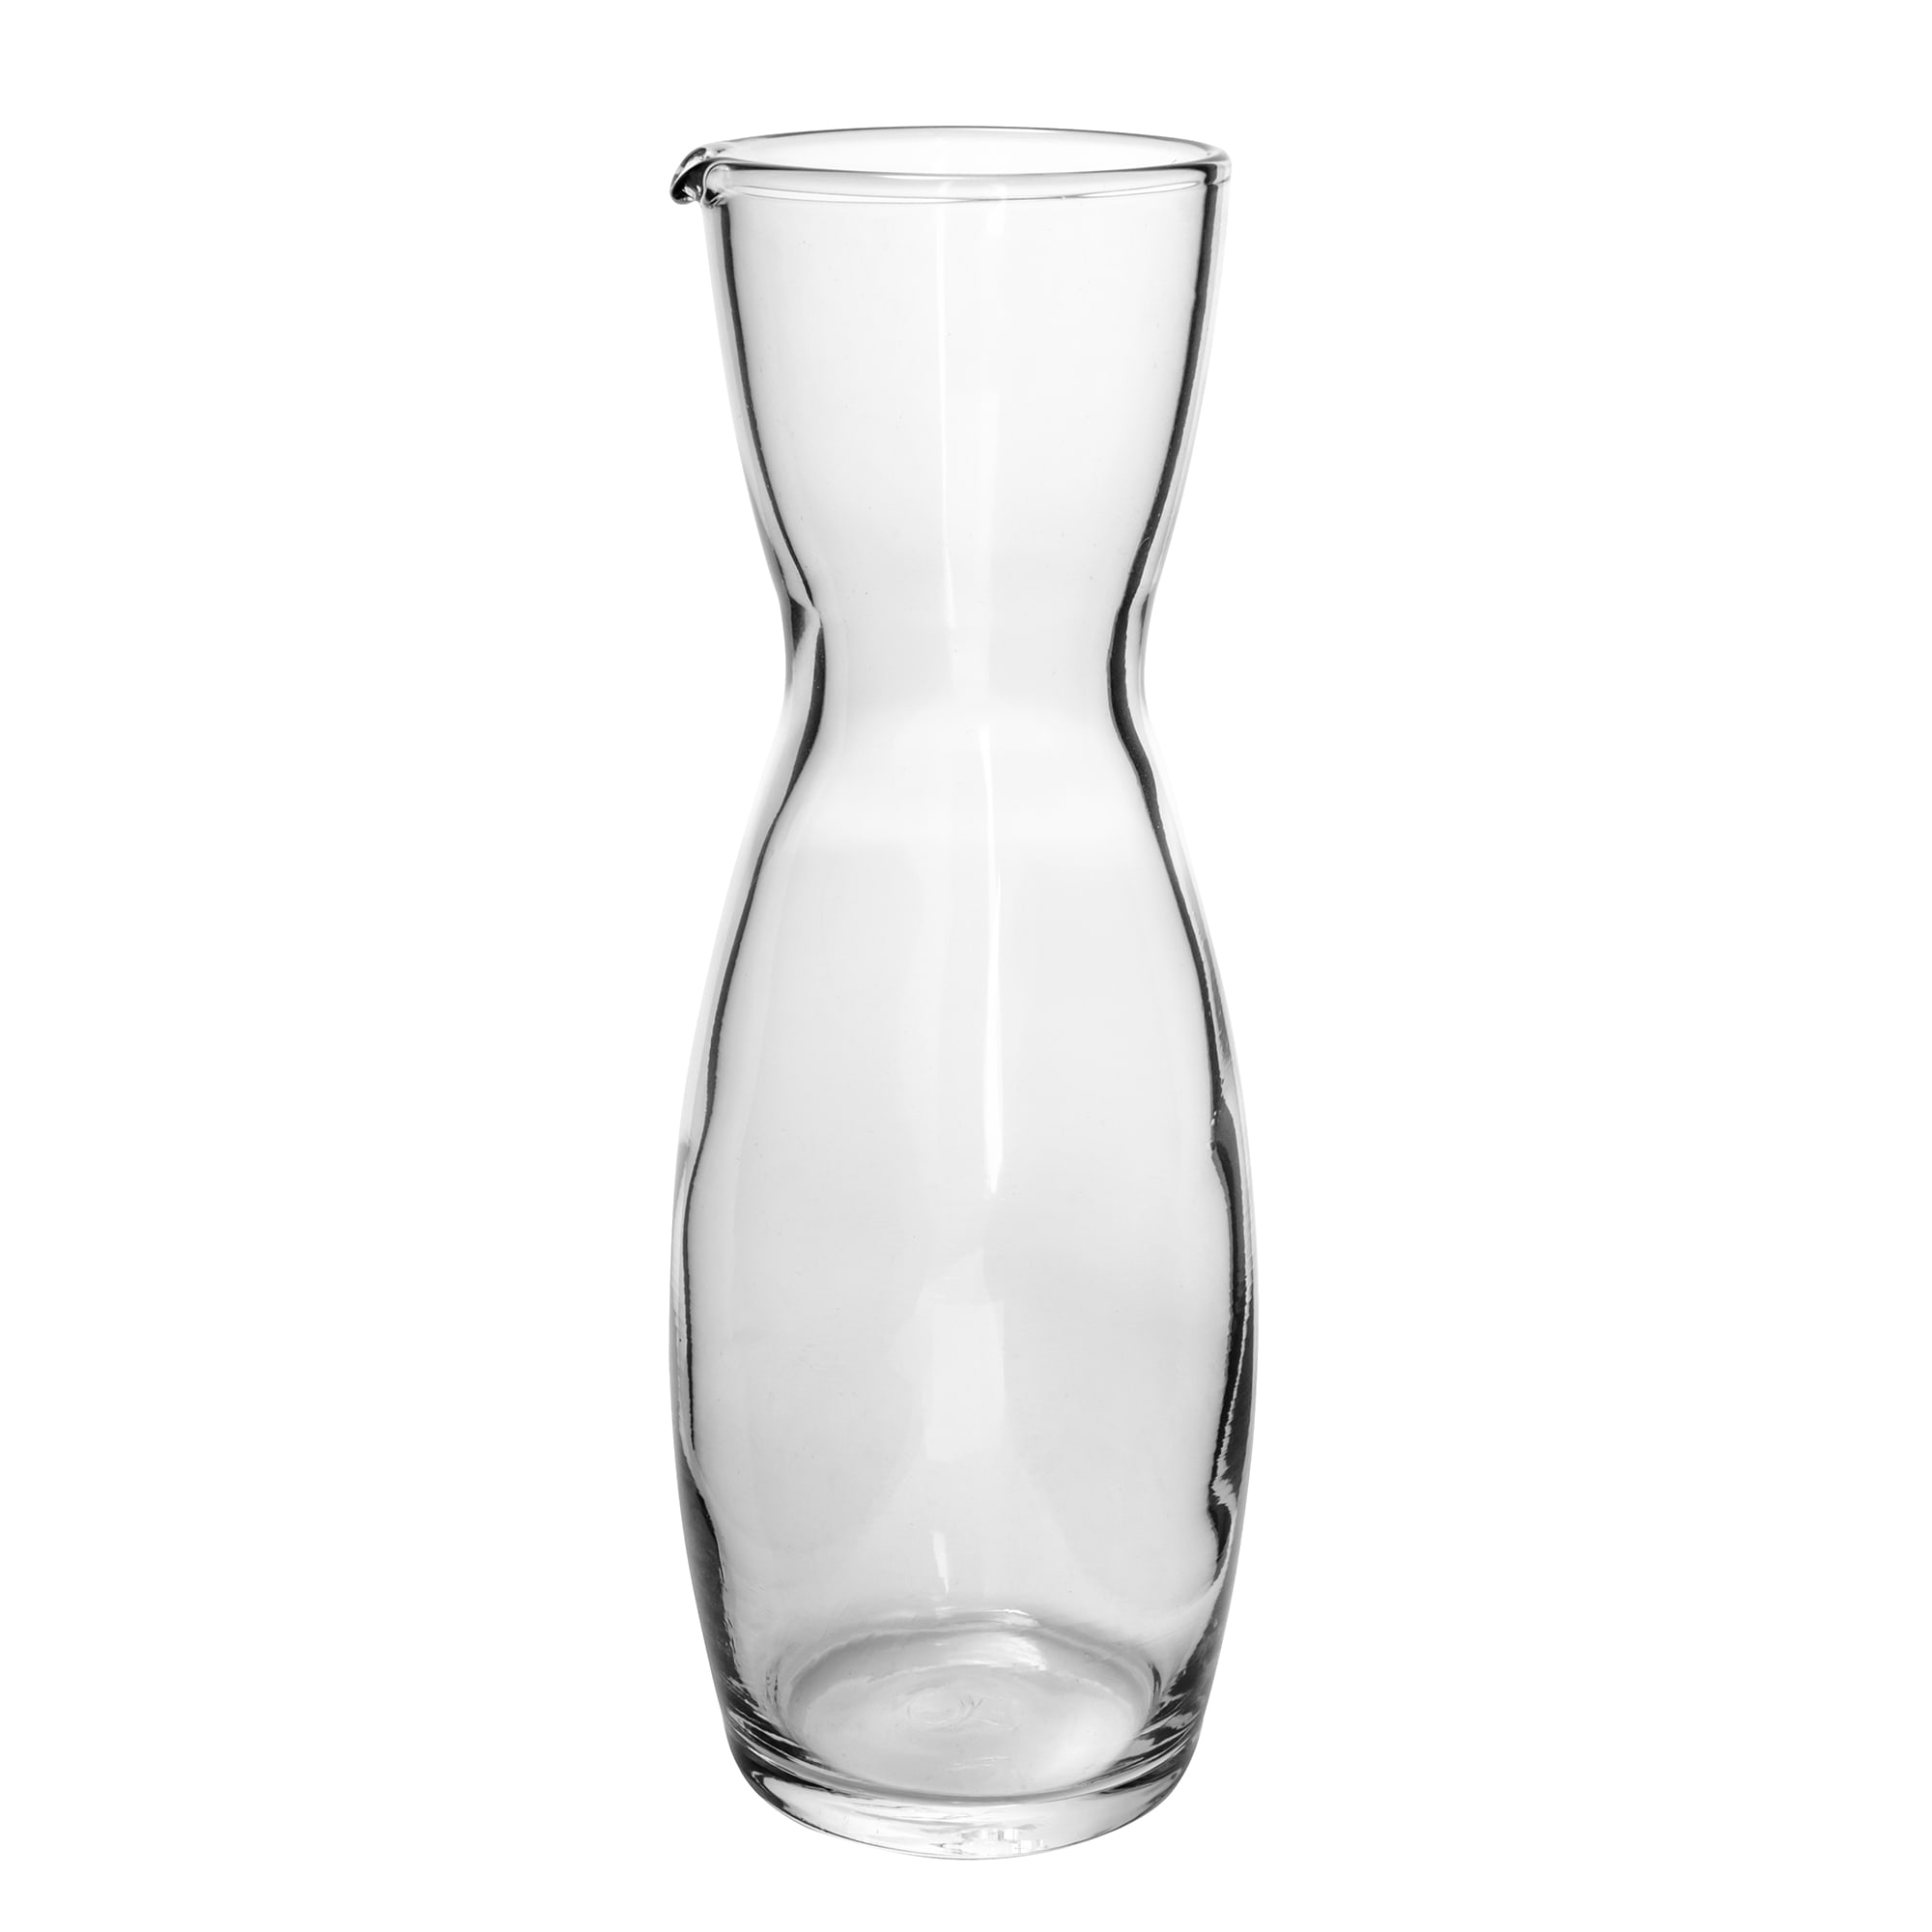 13173021 Decanters/Pitchers Carafe, 33-3/4 oz. (to the neck/fill lin